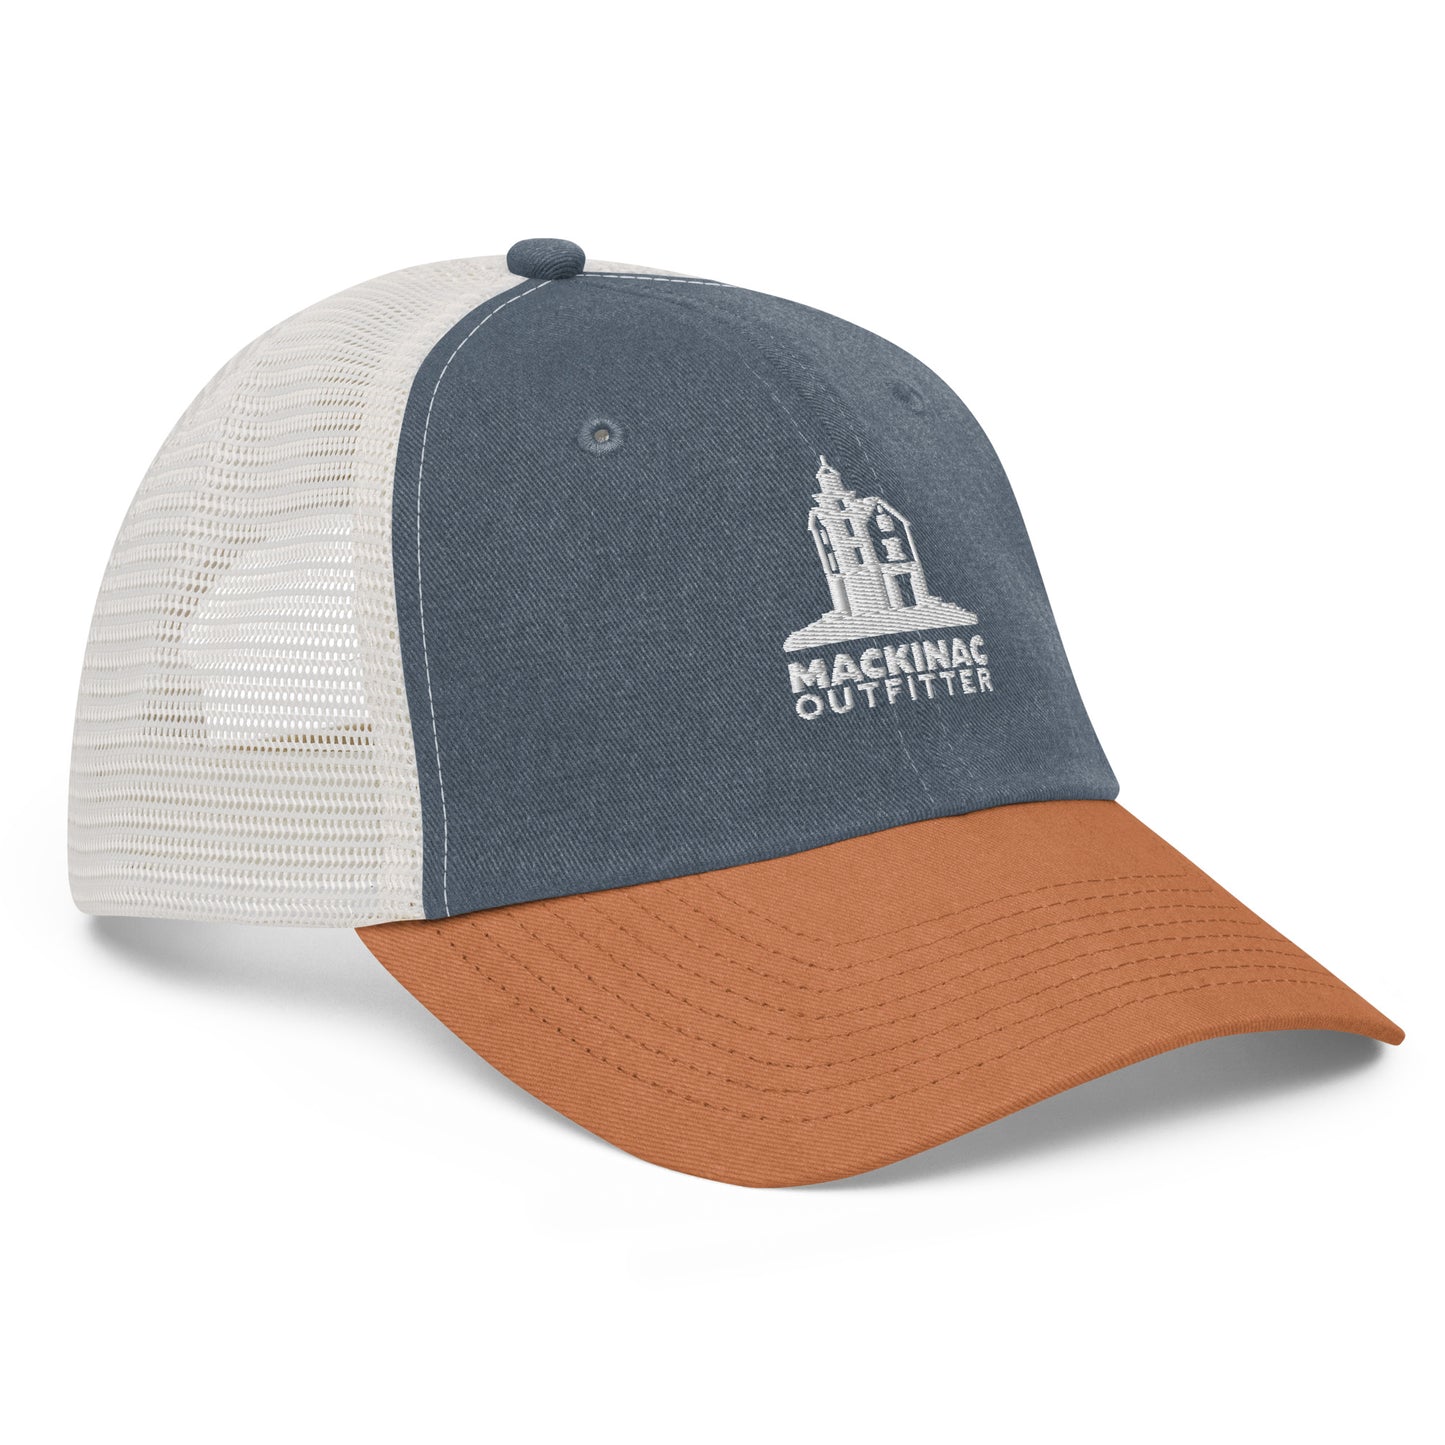 Outfitter Classic Cap